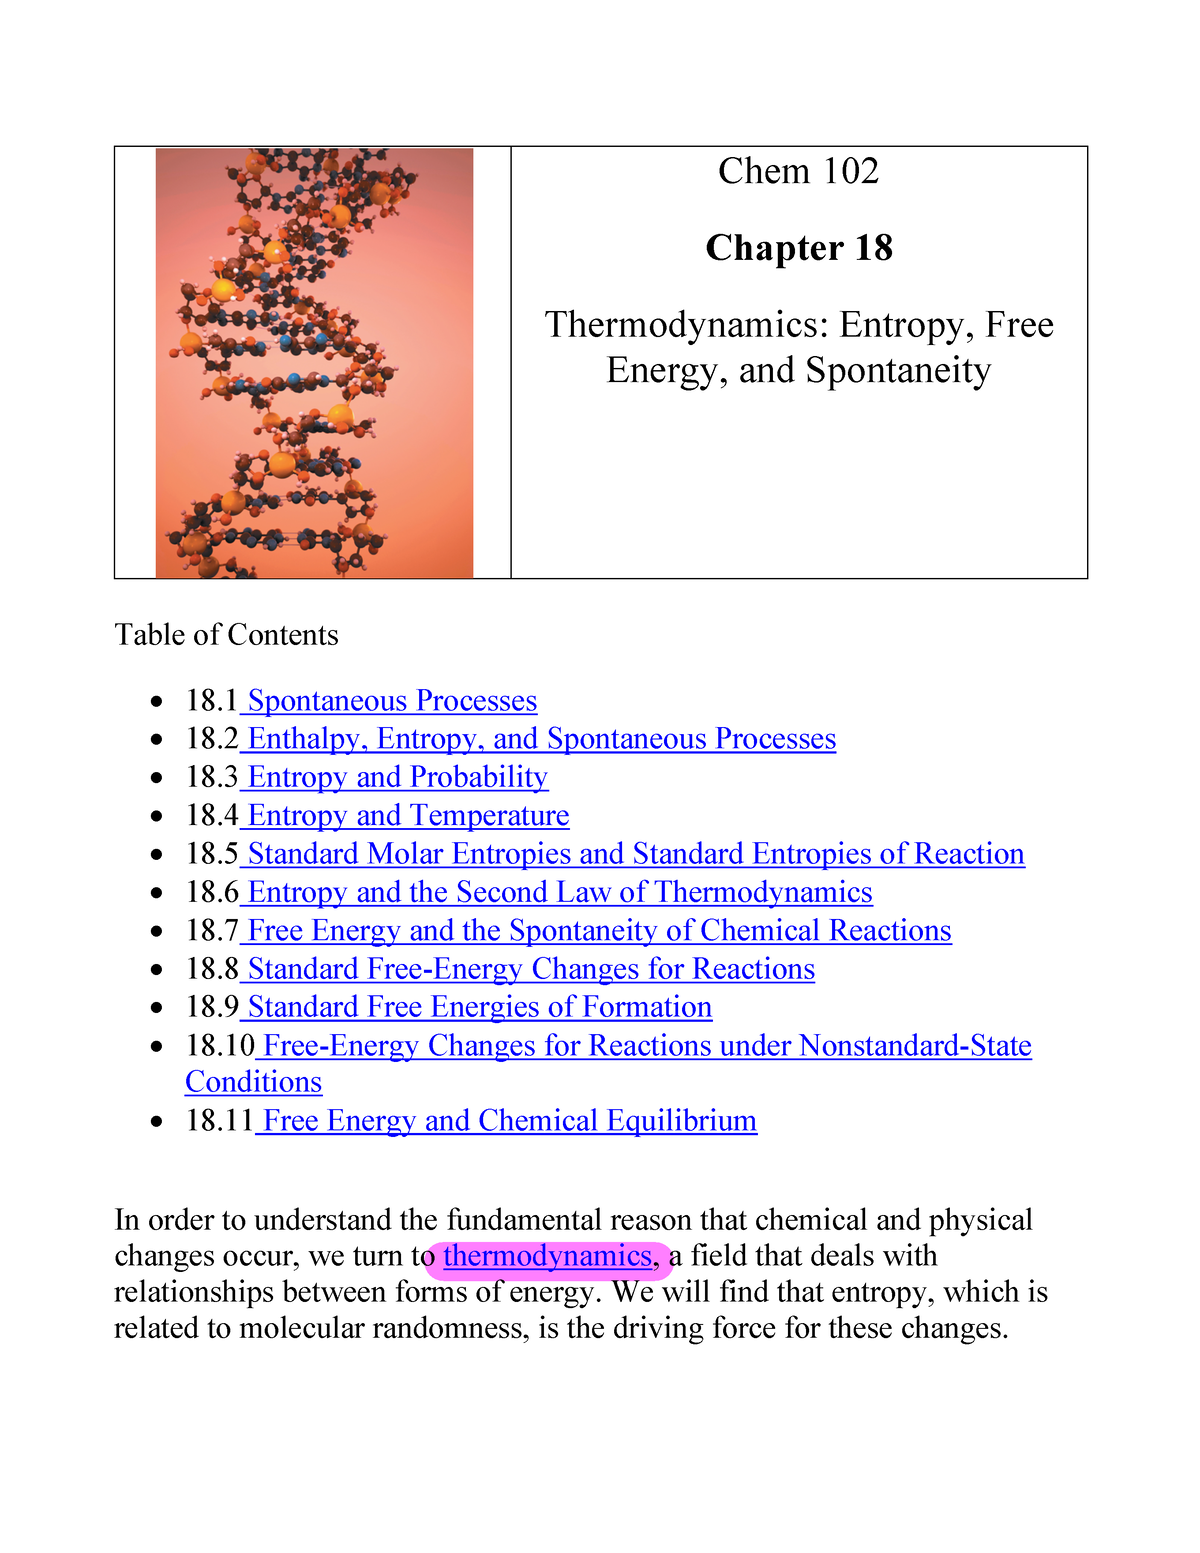 C102 Spr2023 Ch18 Notes Filled Chem 102 Chapter 18 Thermodynamics Entropy Free Energy And 4214